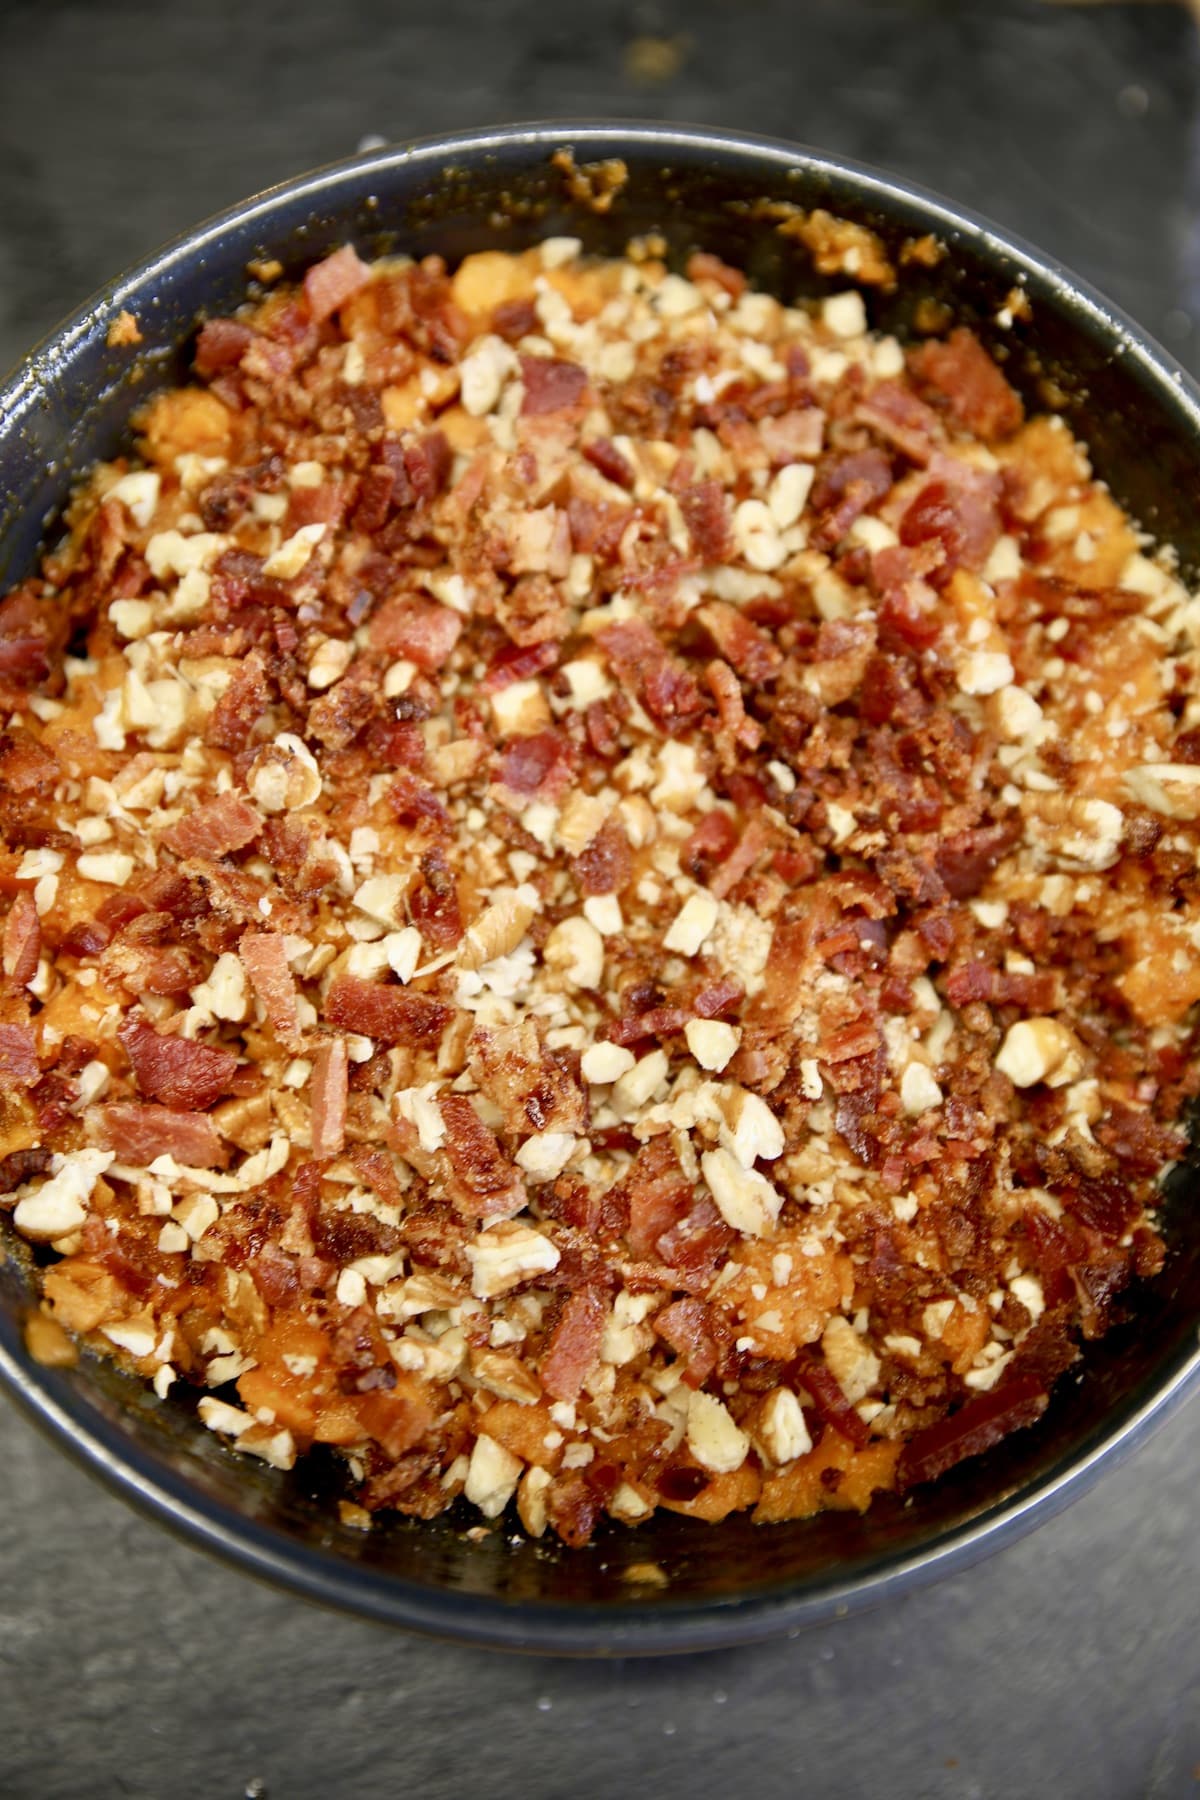 Bowl of sweet potato casserole with bacon and pecans.